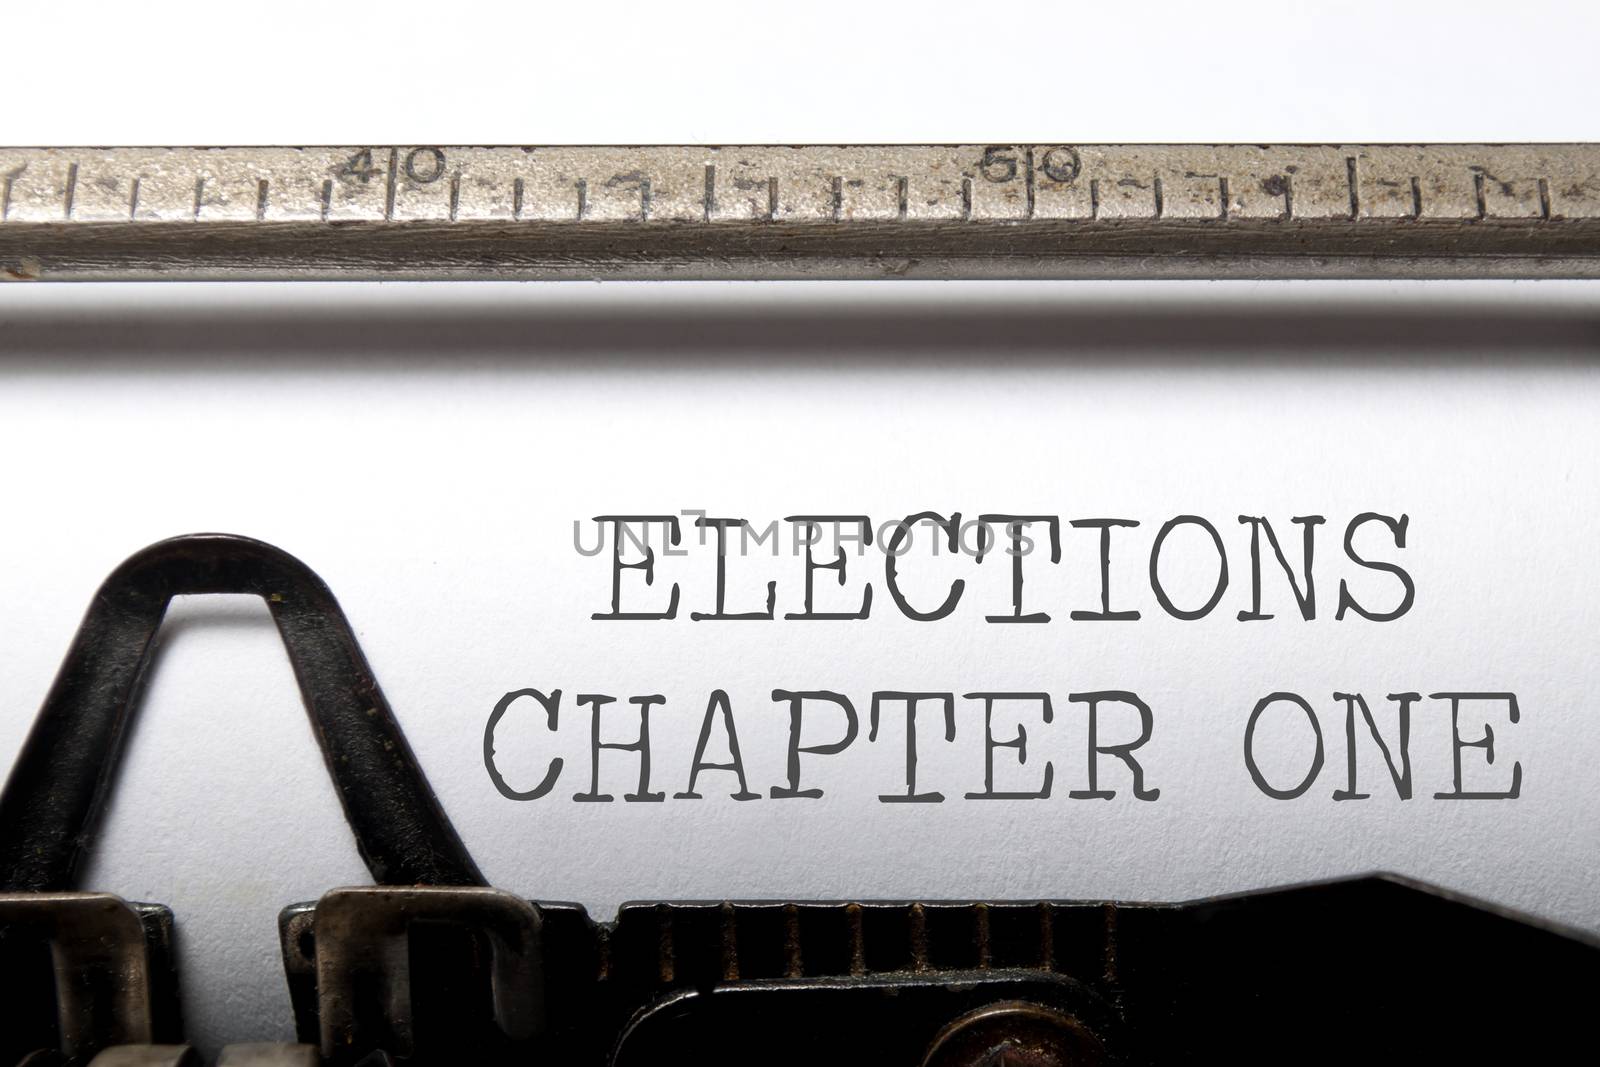 Elections chapter one printed on a typewriter